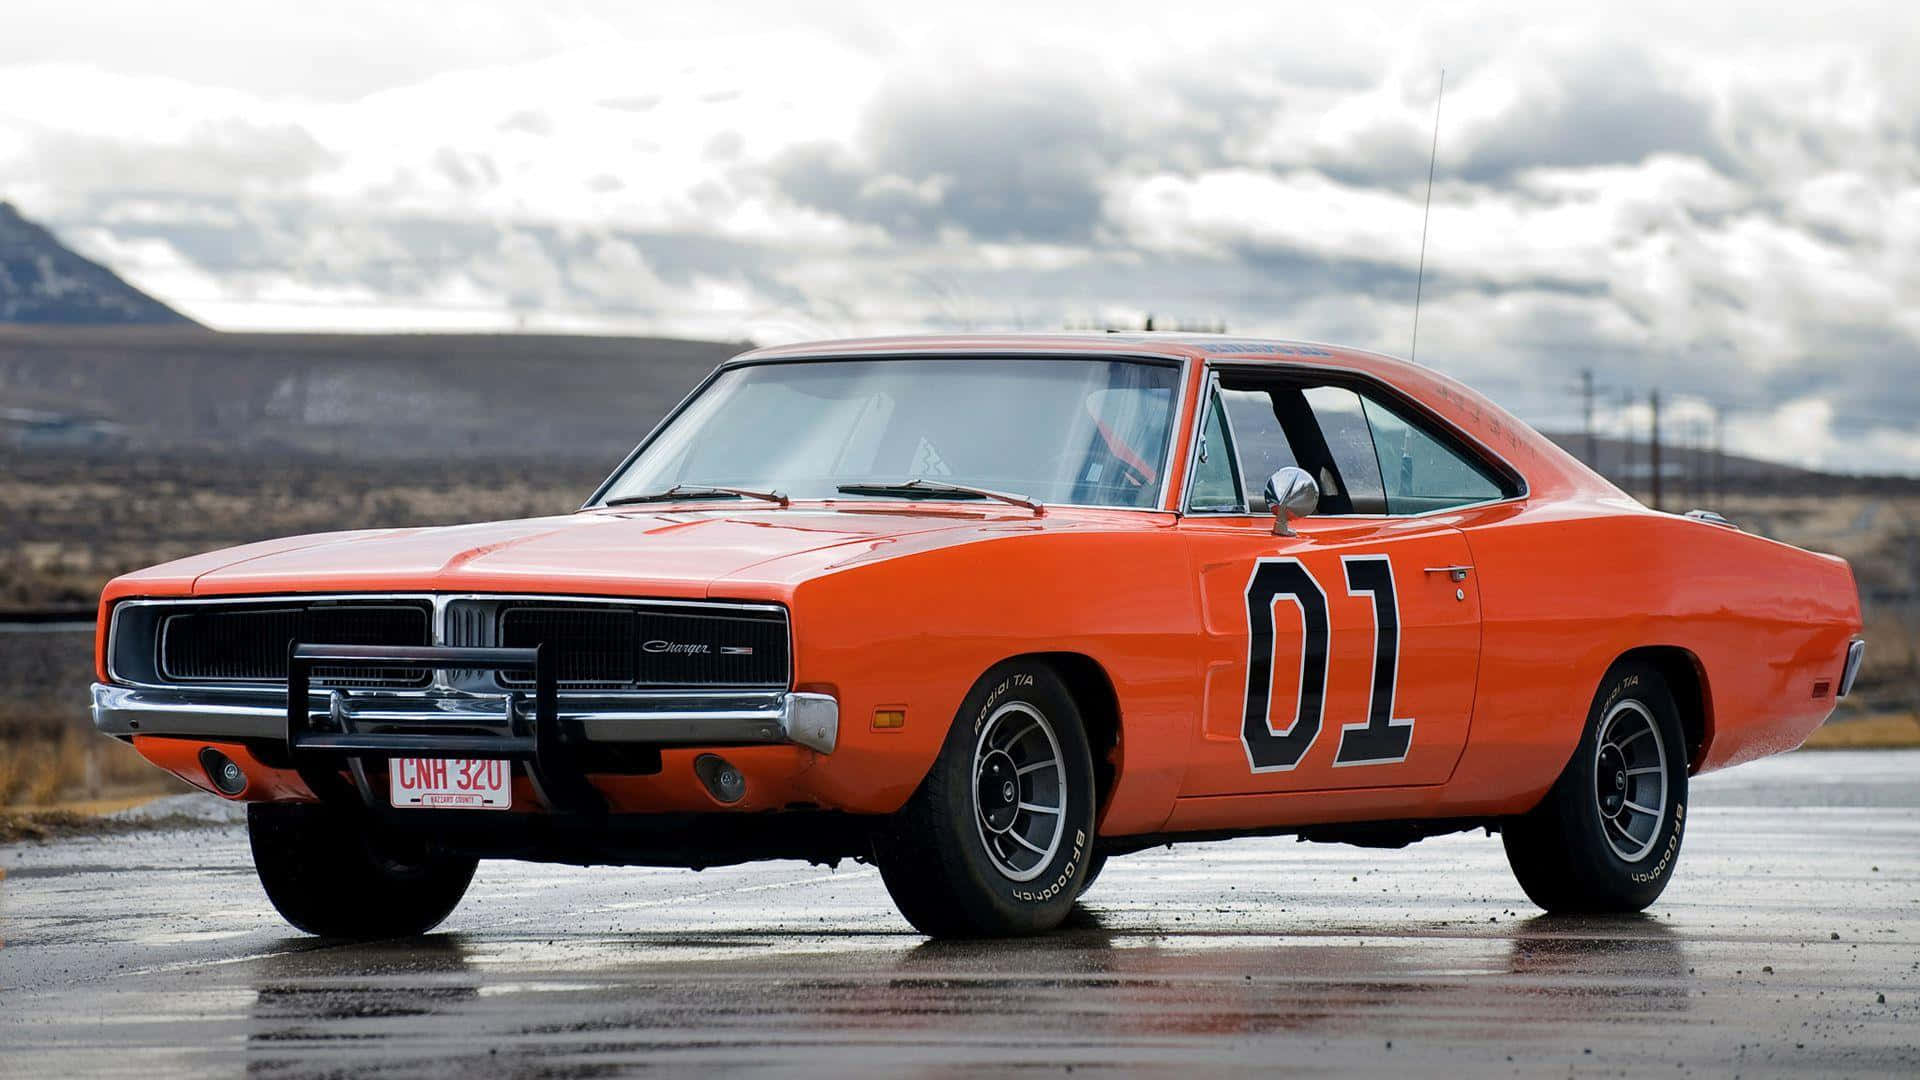 An Orange Dodge Charger Is Parked On The Road Wallpaper